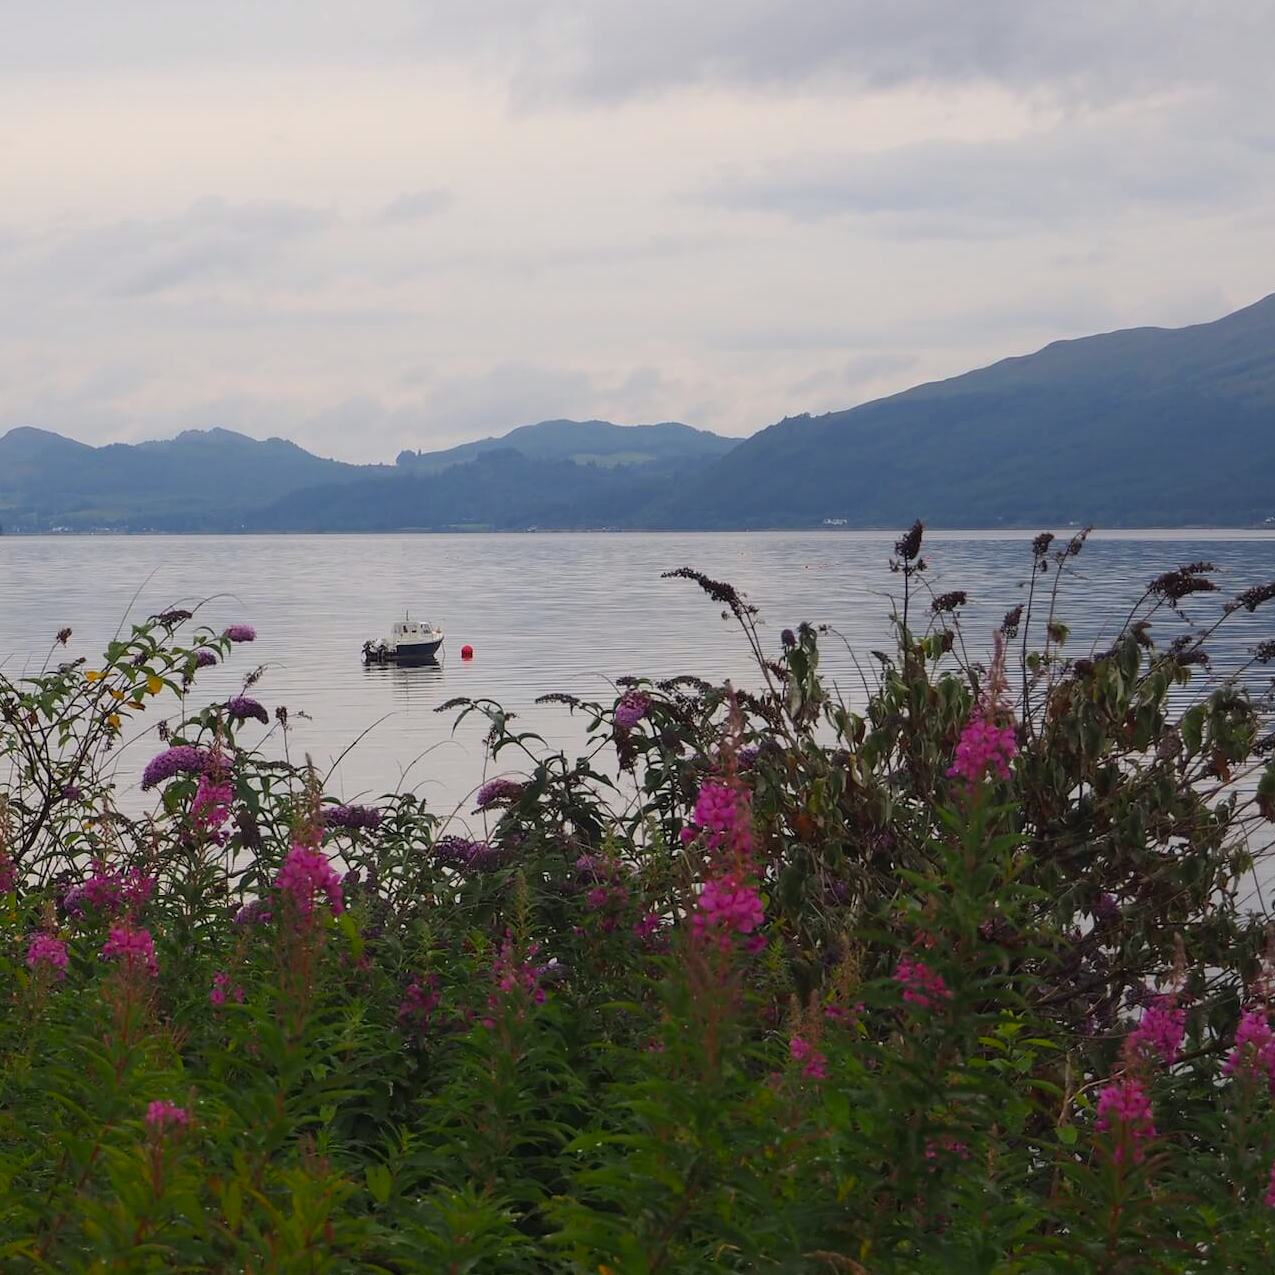 Buddleja and rosebay willowherb flowers along Loch Fyne with moored small fishing boat